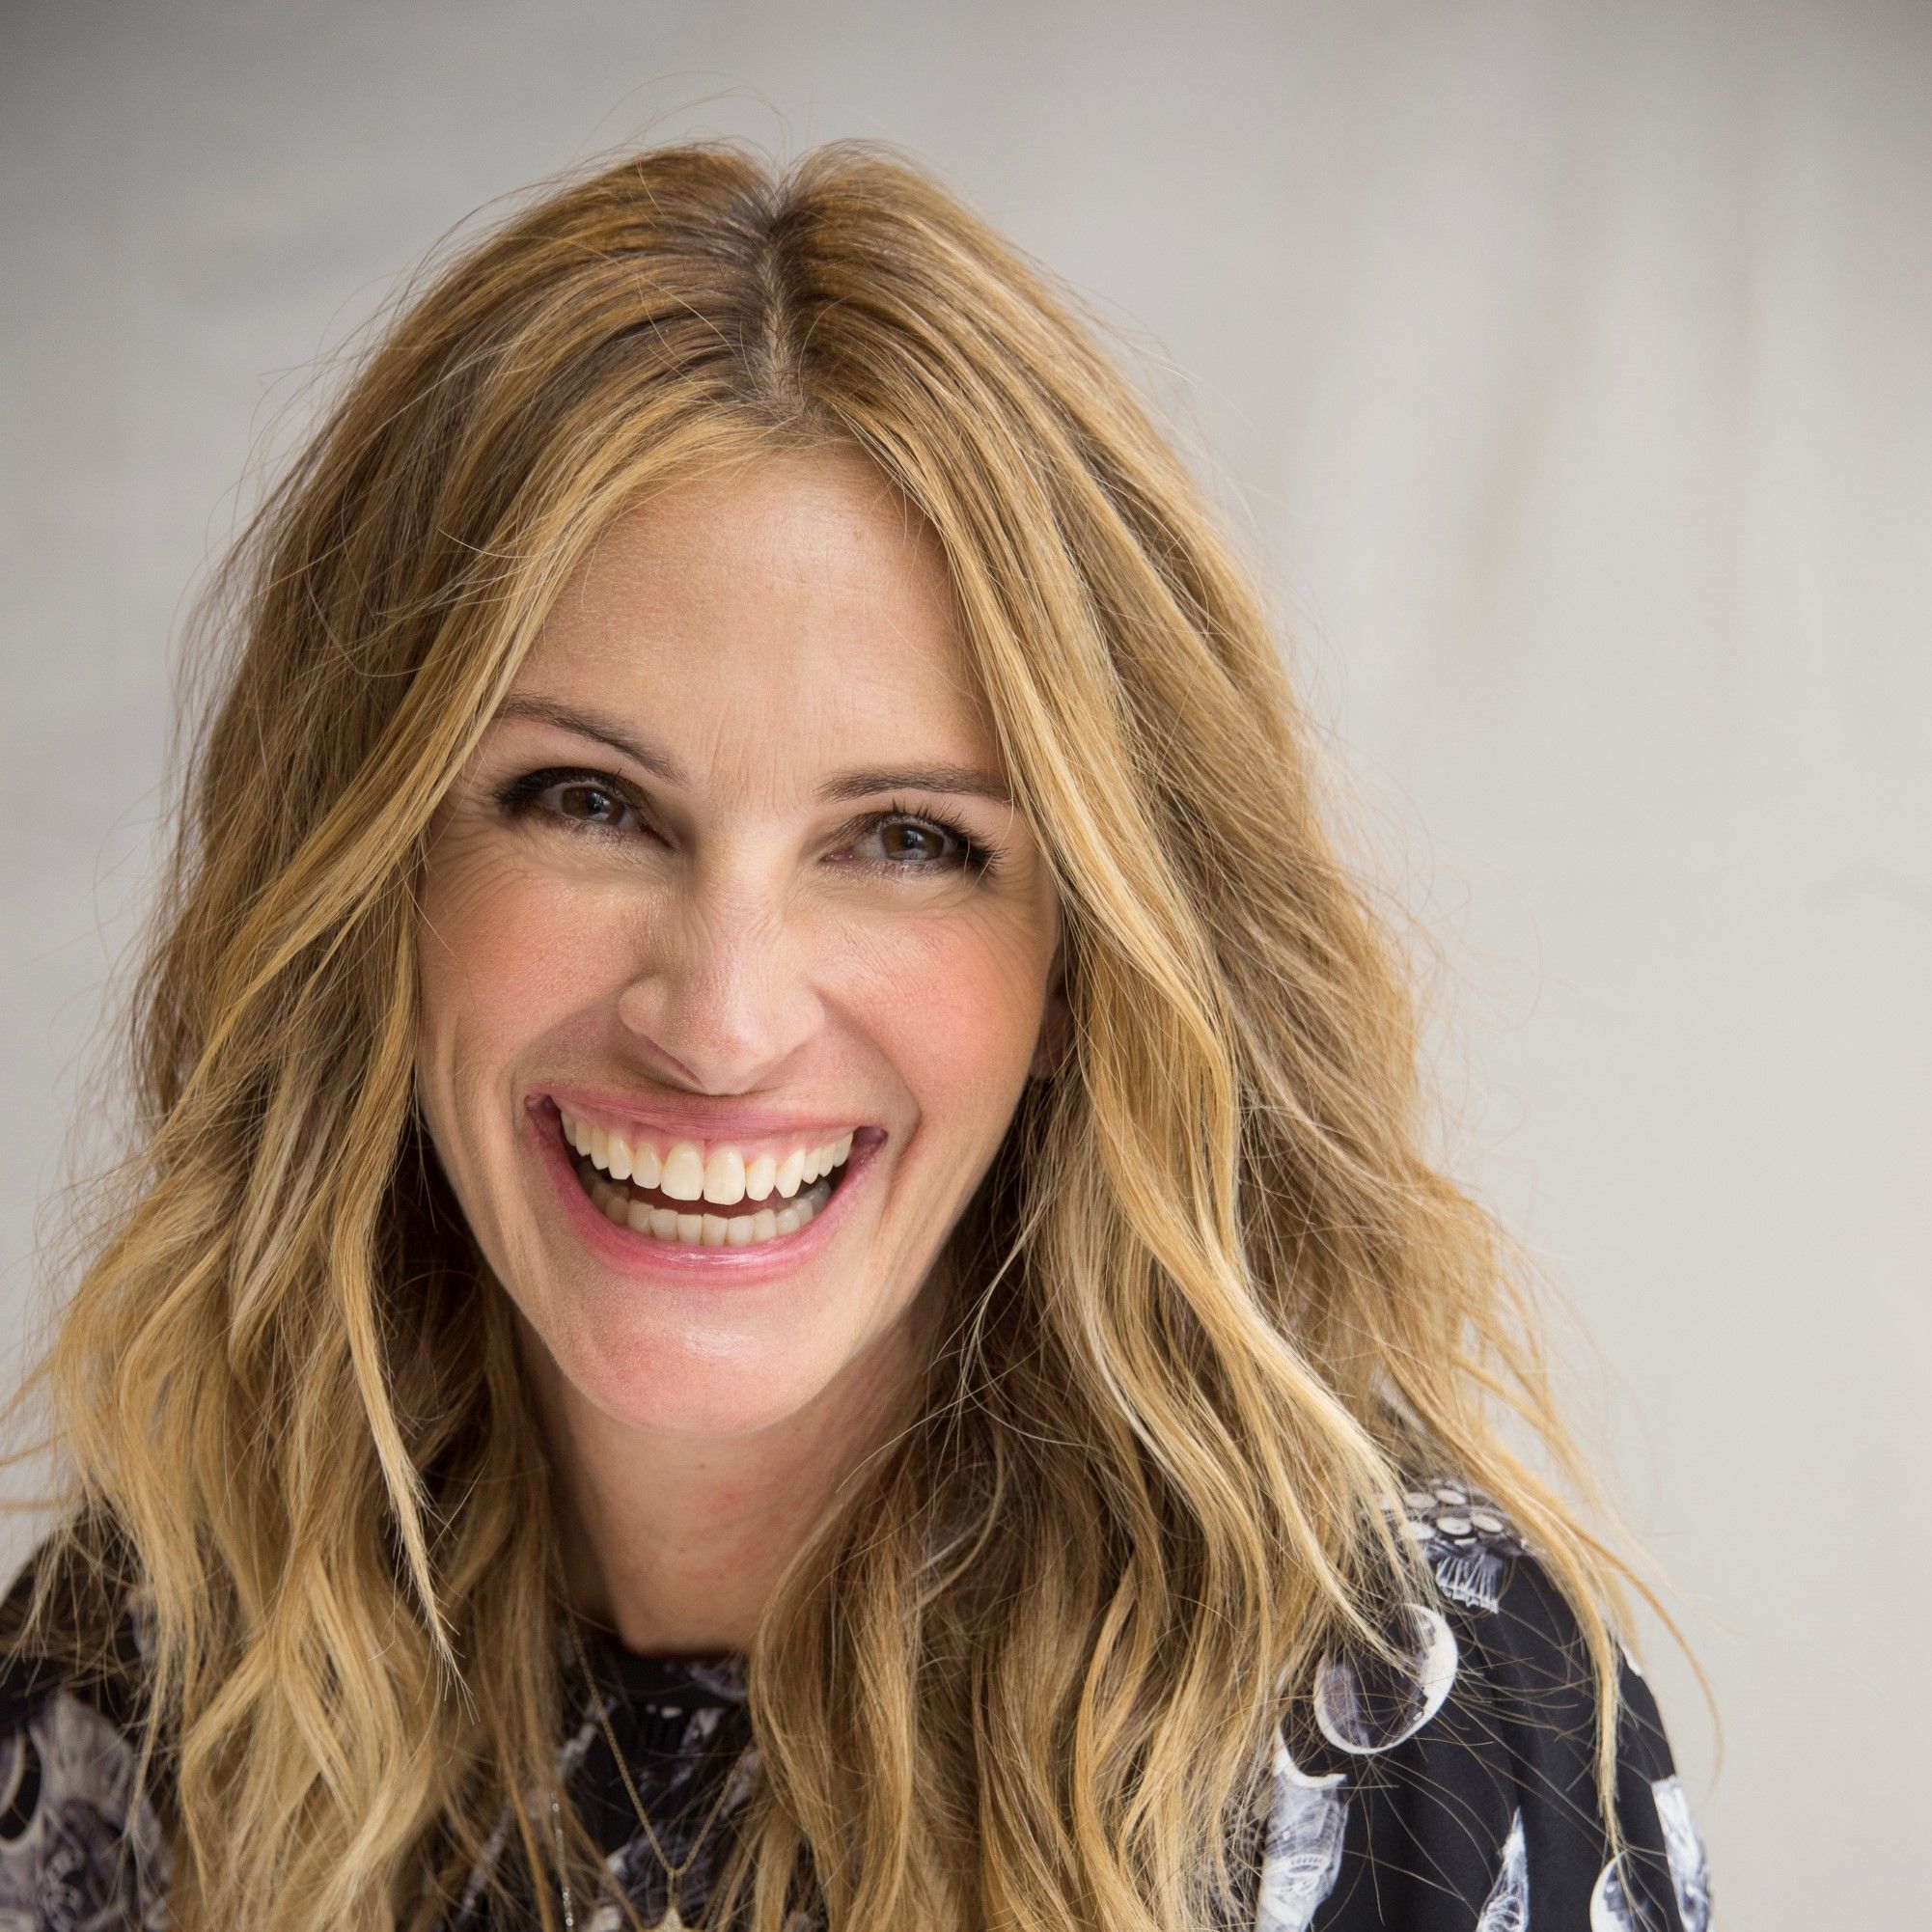 Julia Roberts Got a Gorgeous New Haircut That Everyone Is Freaking Out About